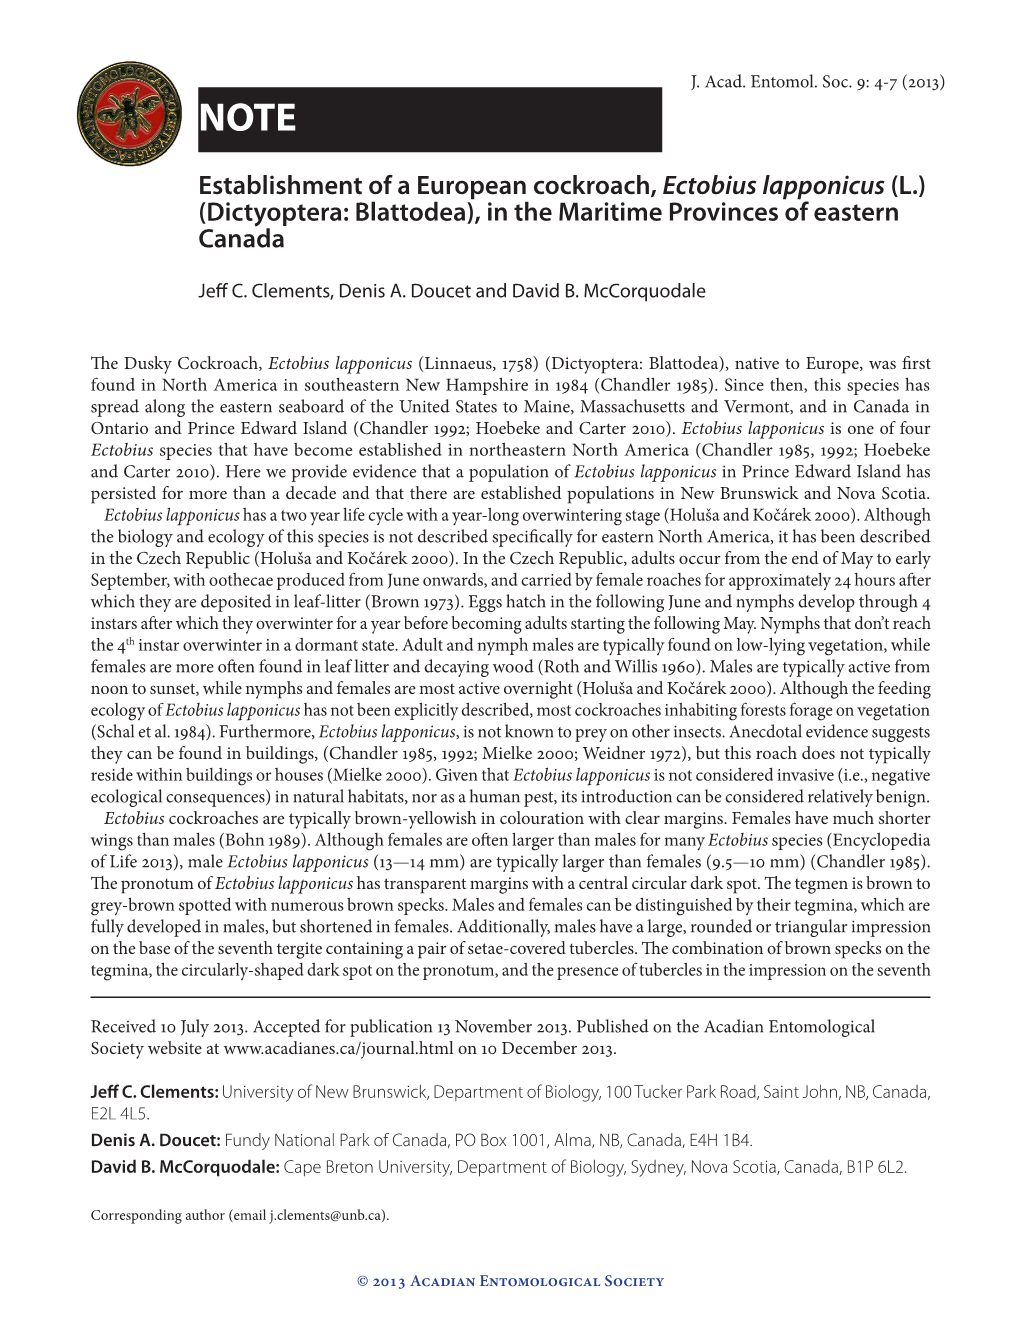 Establishment of a European Cockroach, Ectobius Lapponicus (L.) (Dictyoptera: Blattodea), in the Maritime Provinces of Eastern Canada